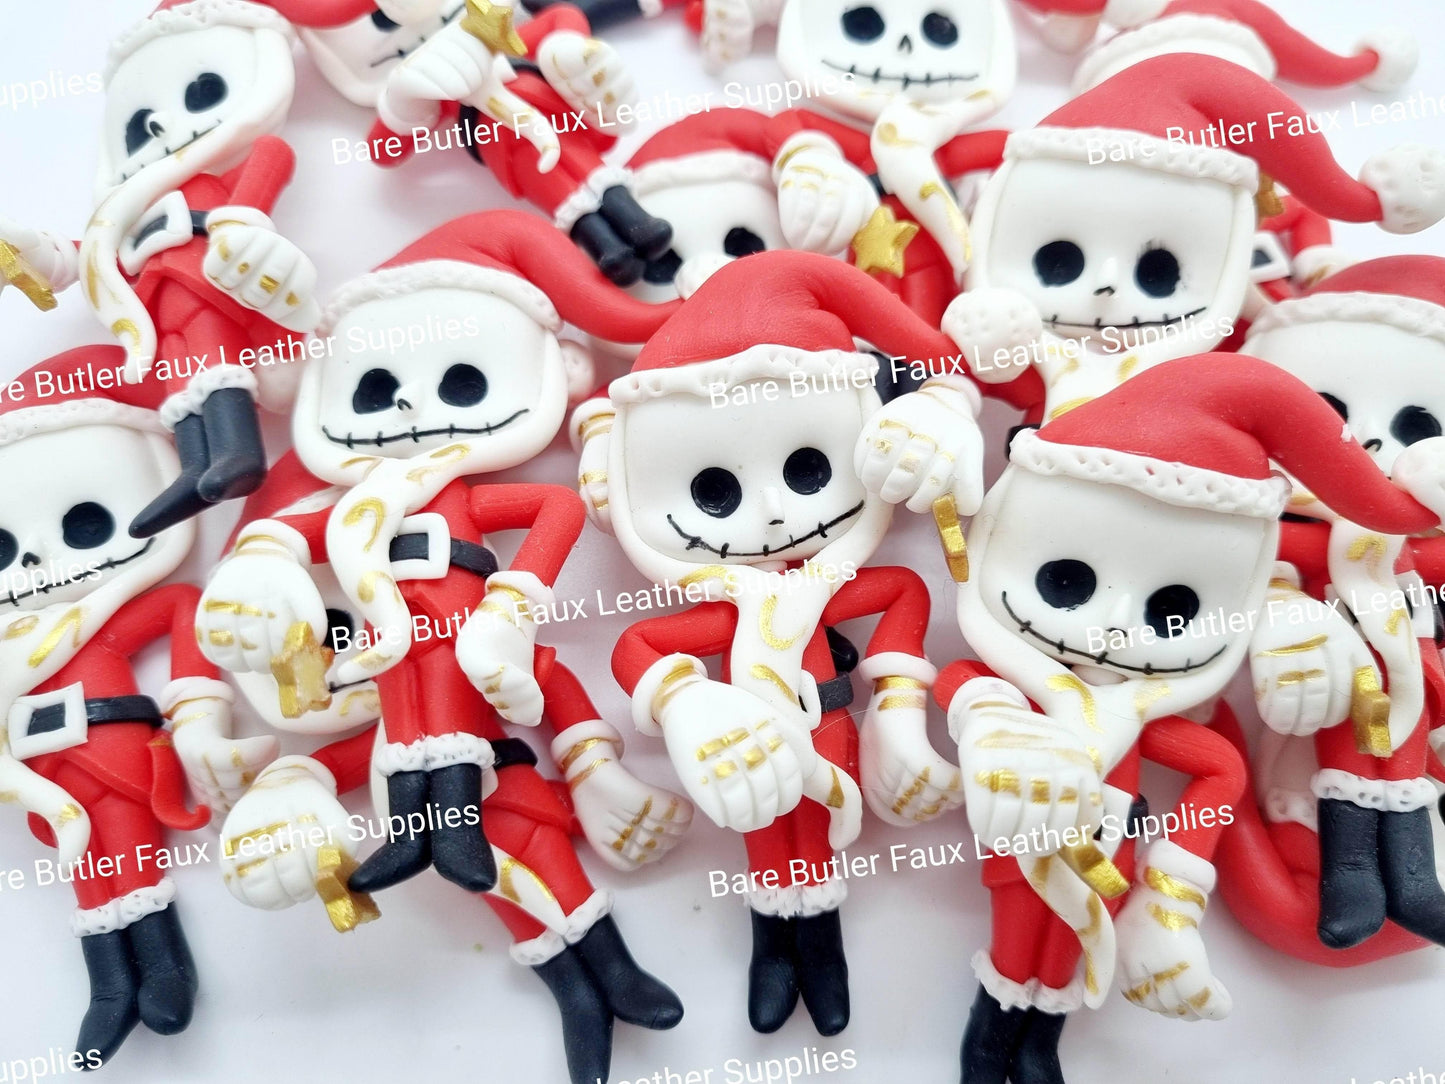 Sandy Claws - clause, Clay, Clays, jack, Nightmare, Nightmare before chrismas, sandy, santa - Bare Butler Faux Leather Supplies 